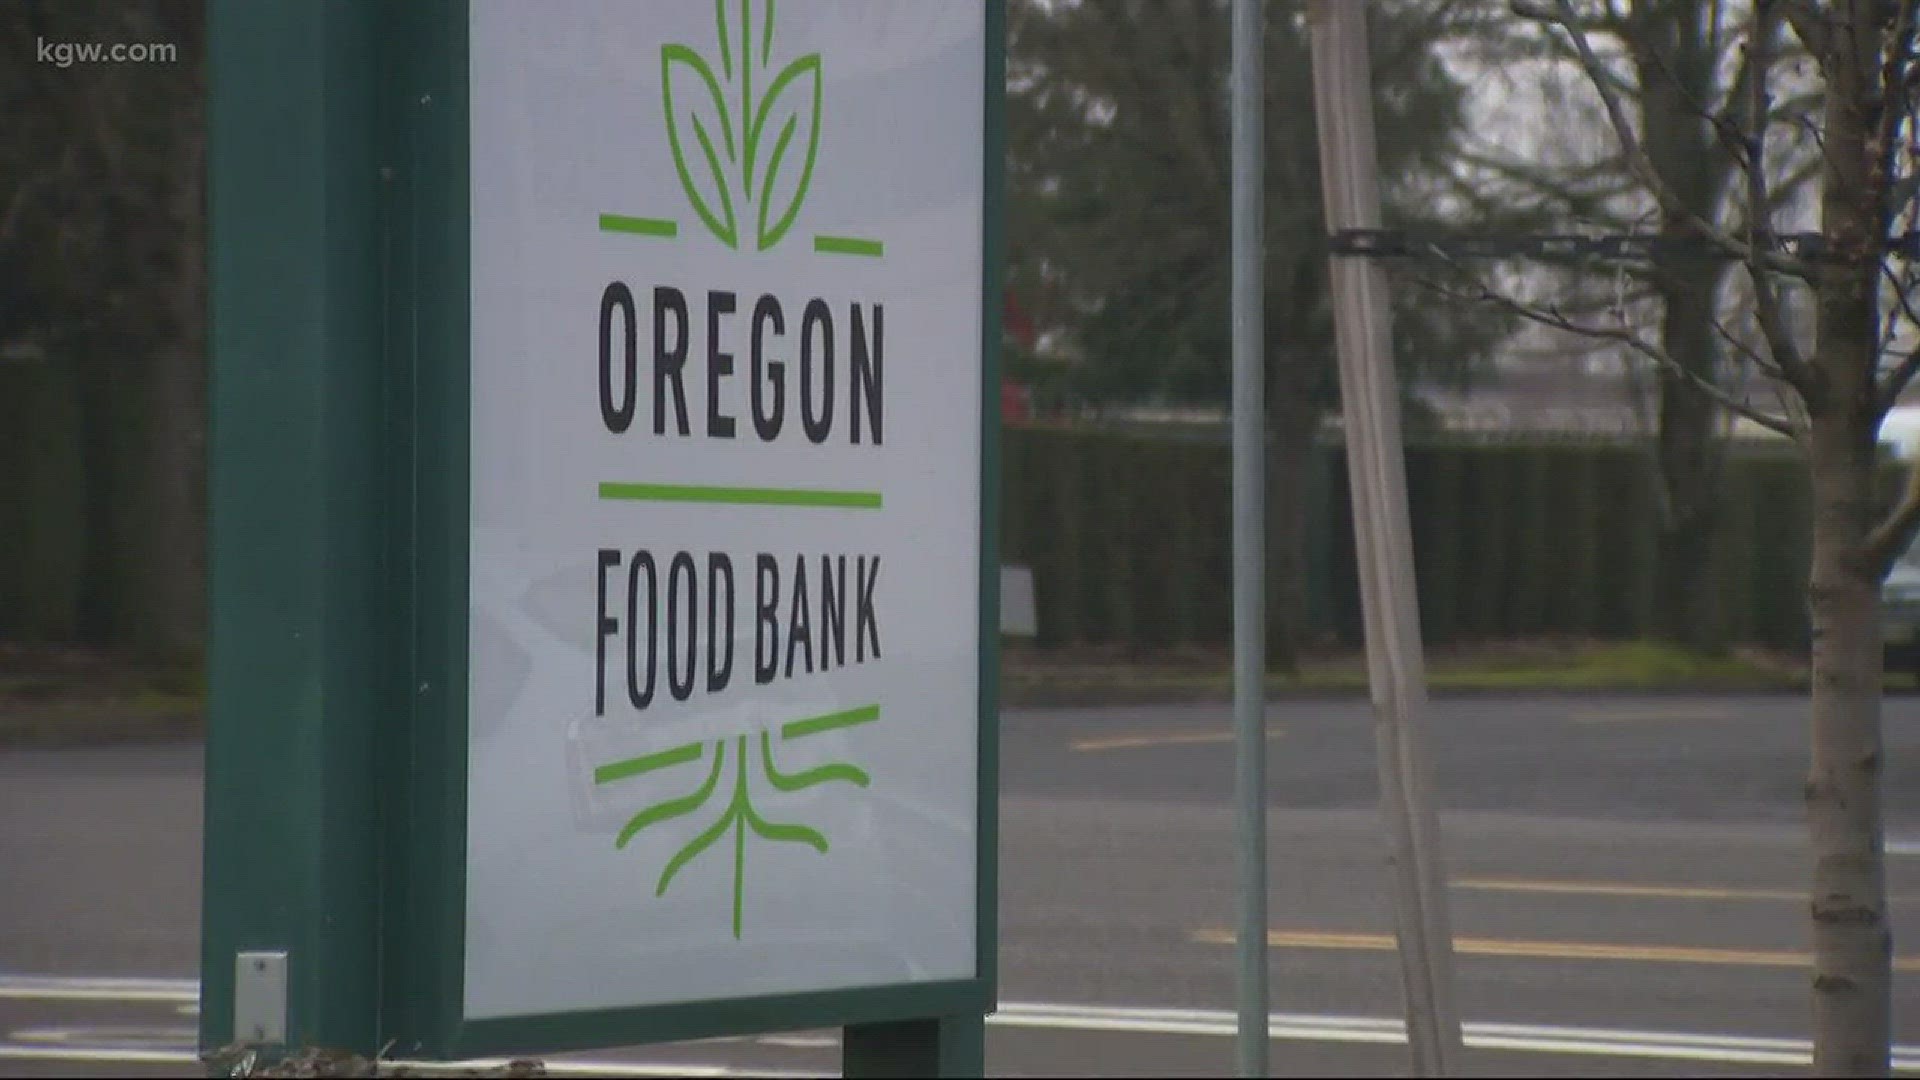 The tax plan approved by congress could impact nonprofits in Oregon.